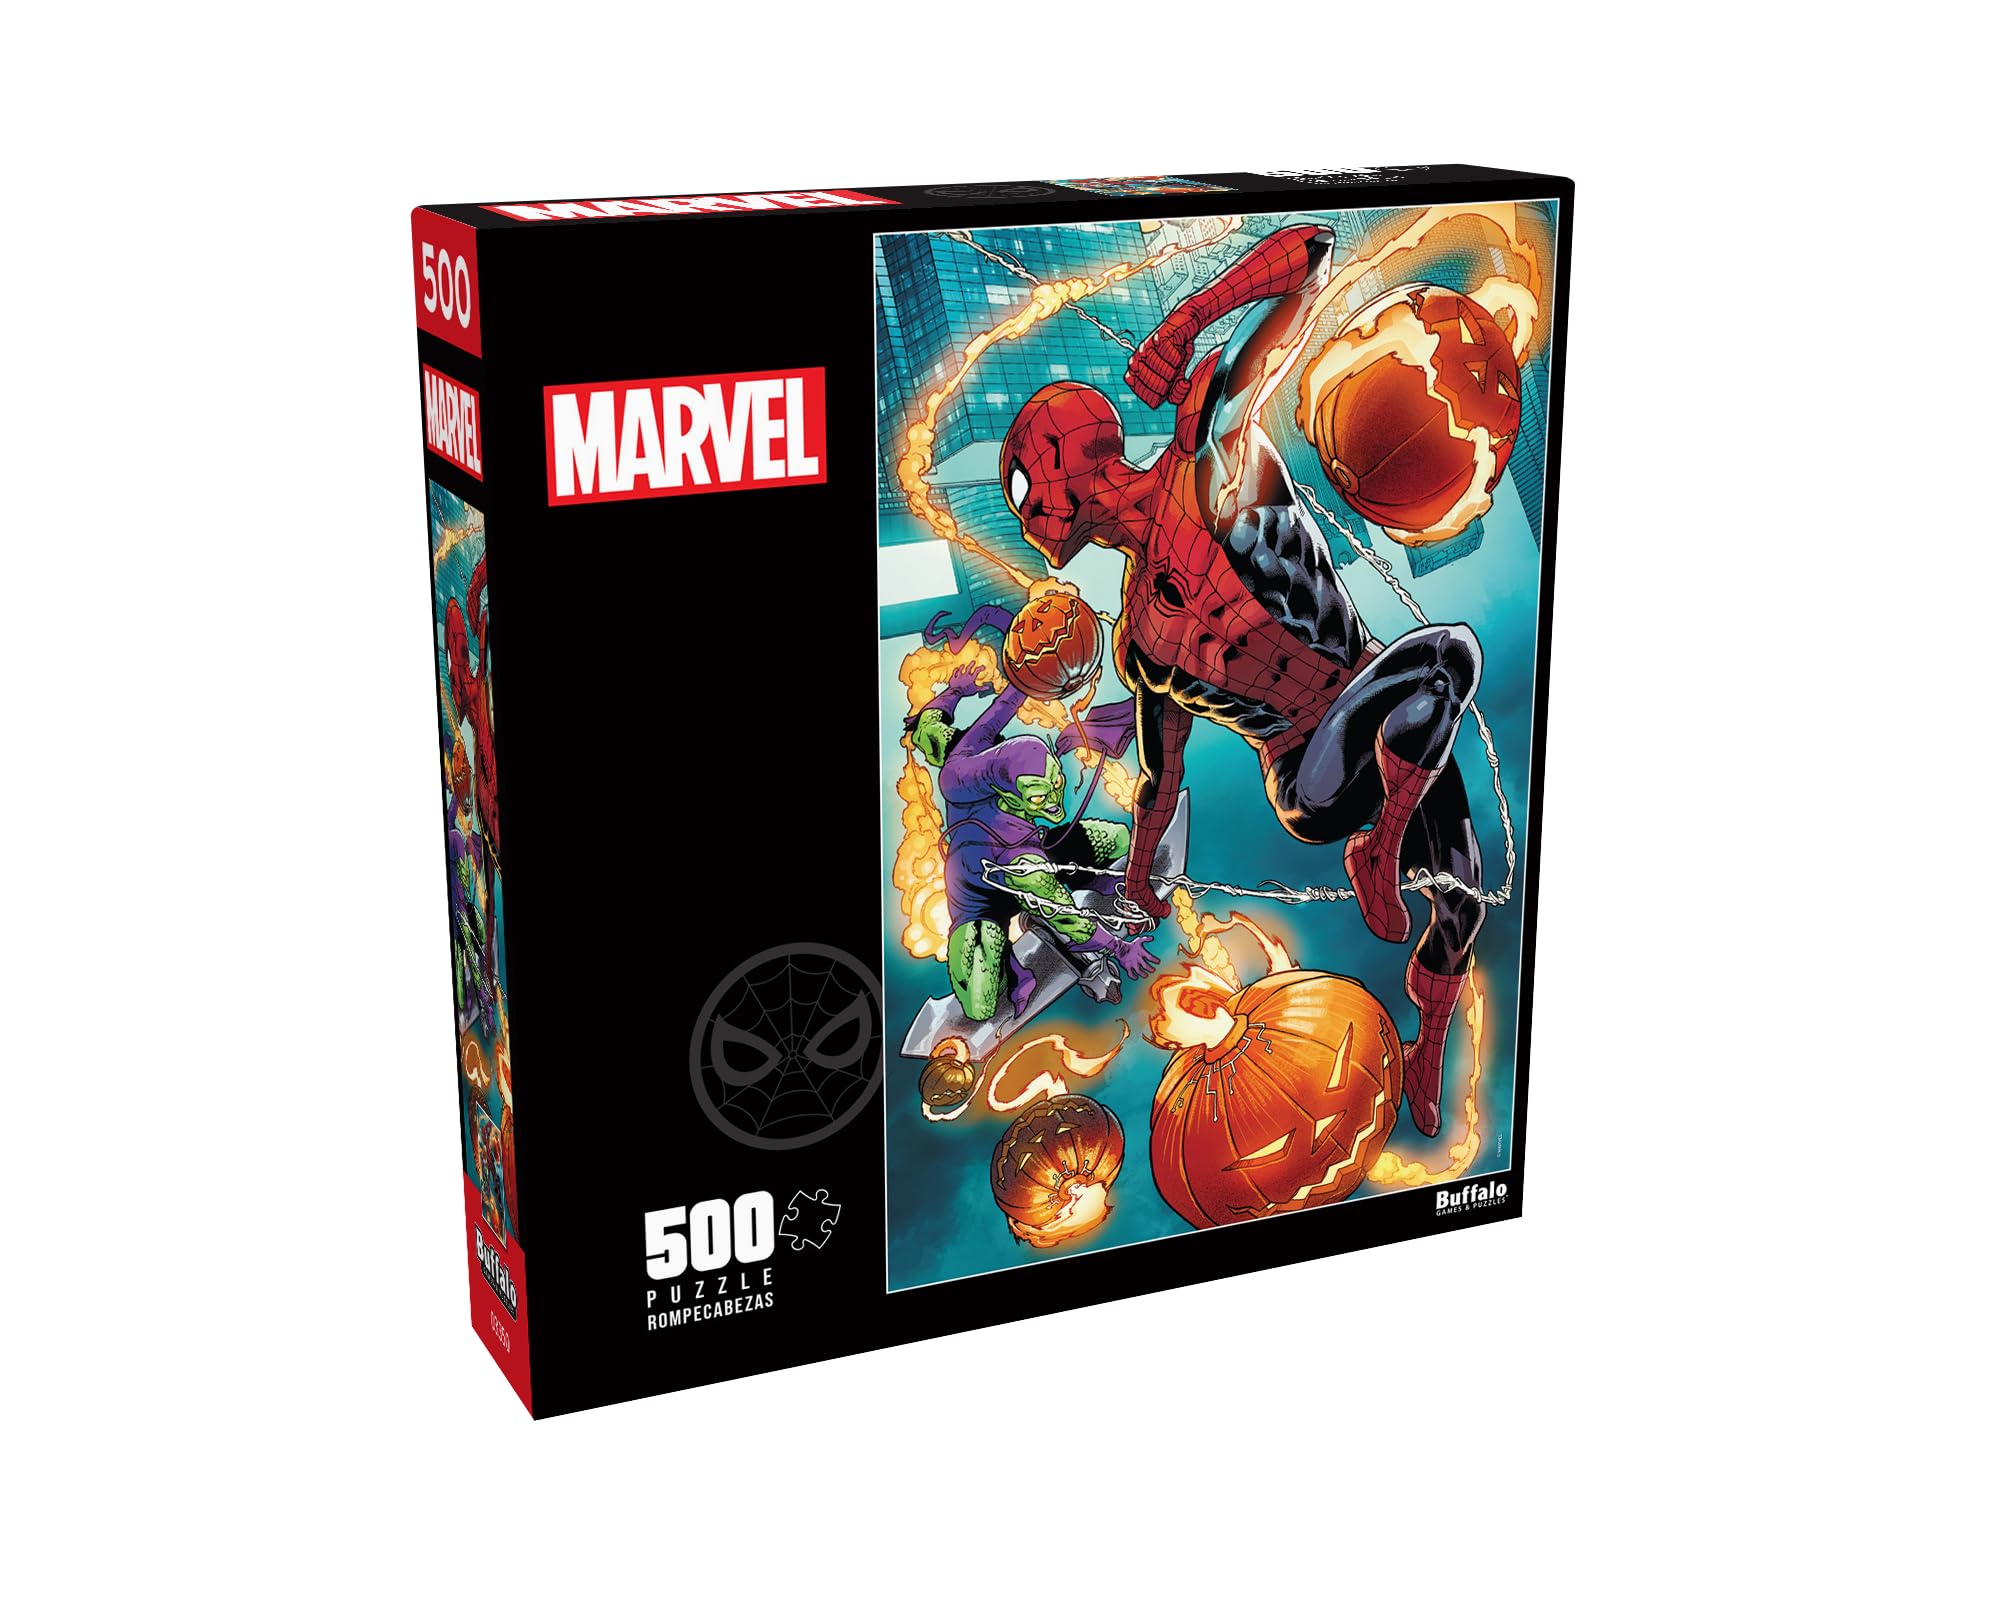 Buffalo Games - Marvel - Spider-Man vs. Green Goblin - 500 Piece Jigsaw Puzzle for Adults Challenging Puzzle Perfect for Game Nights - Finished Size 21.25 x 15.00